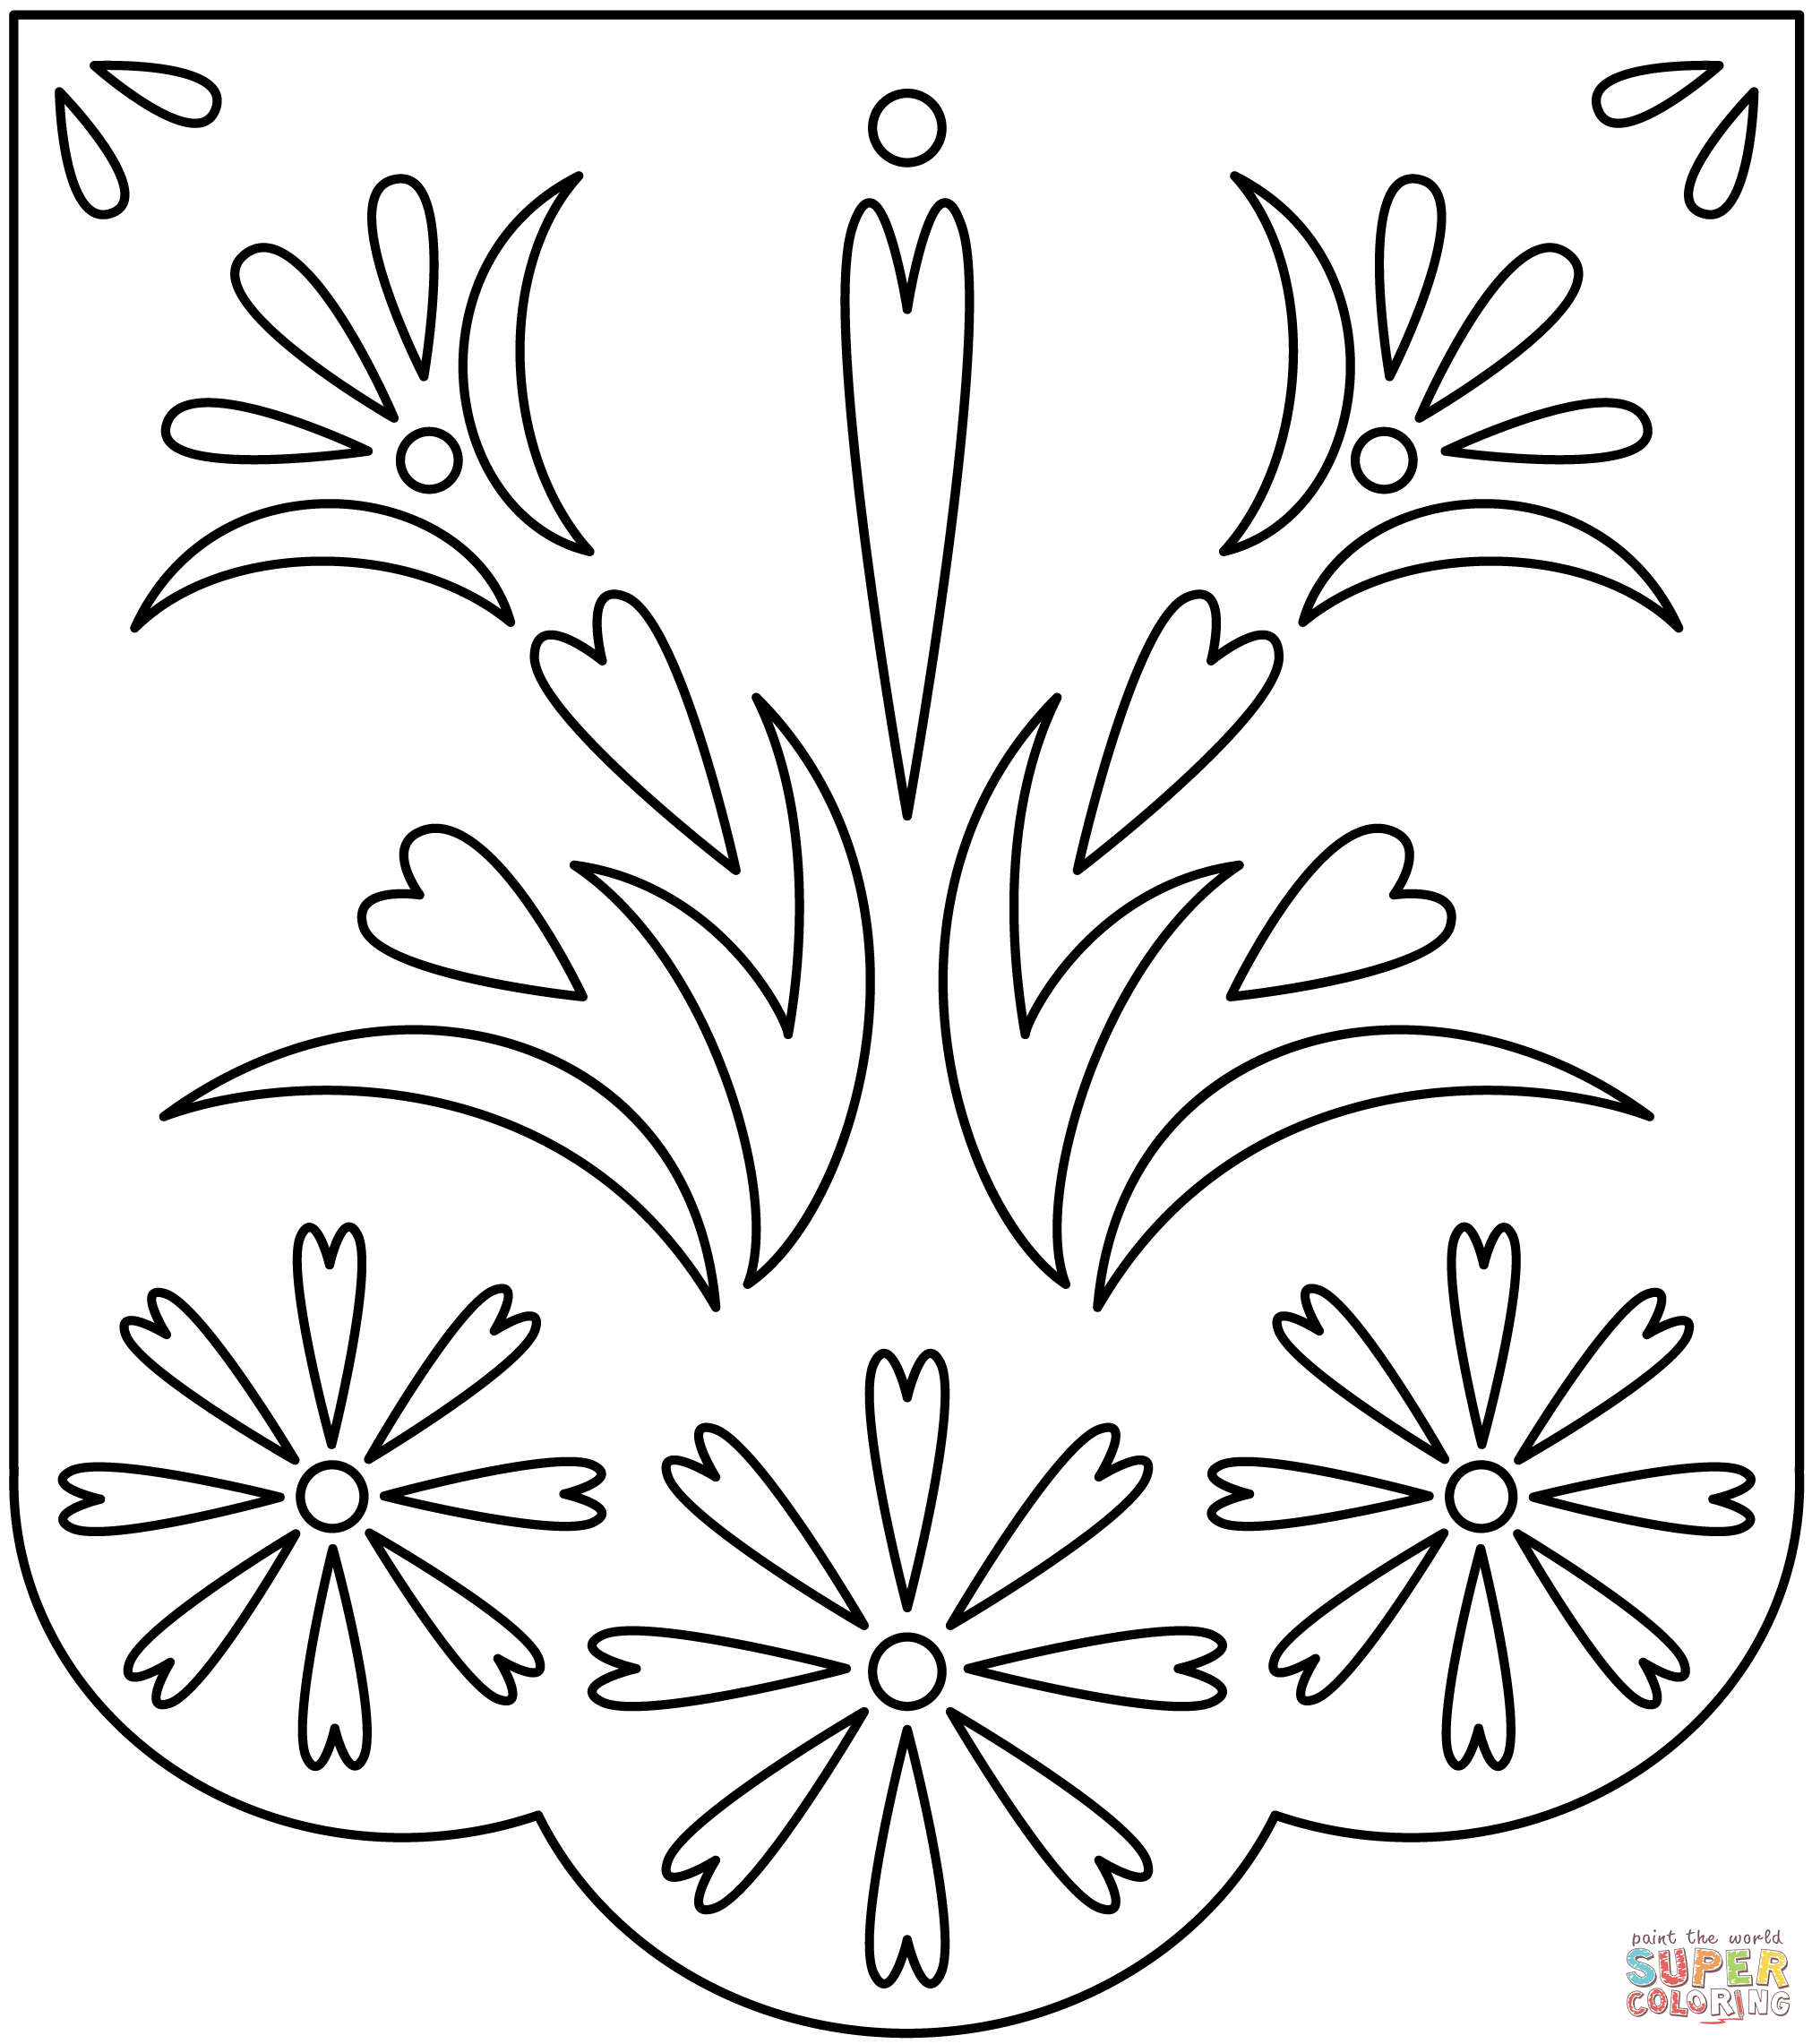 Simple papel picado coloring page free printable coloring pages